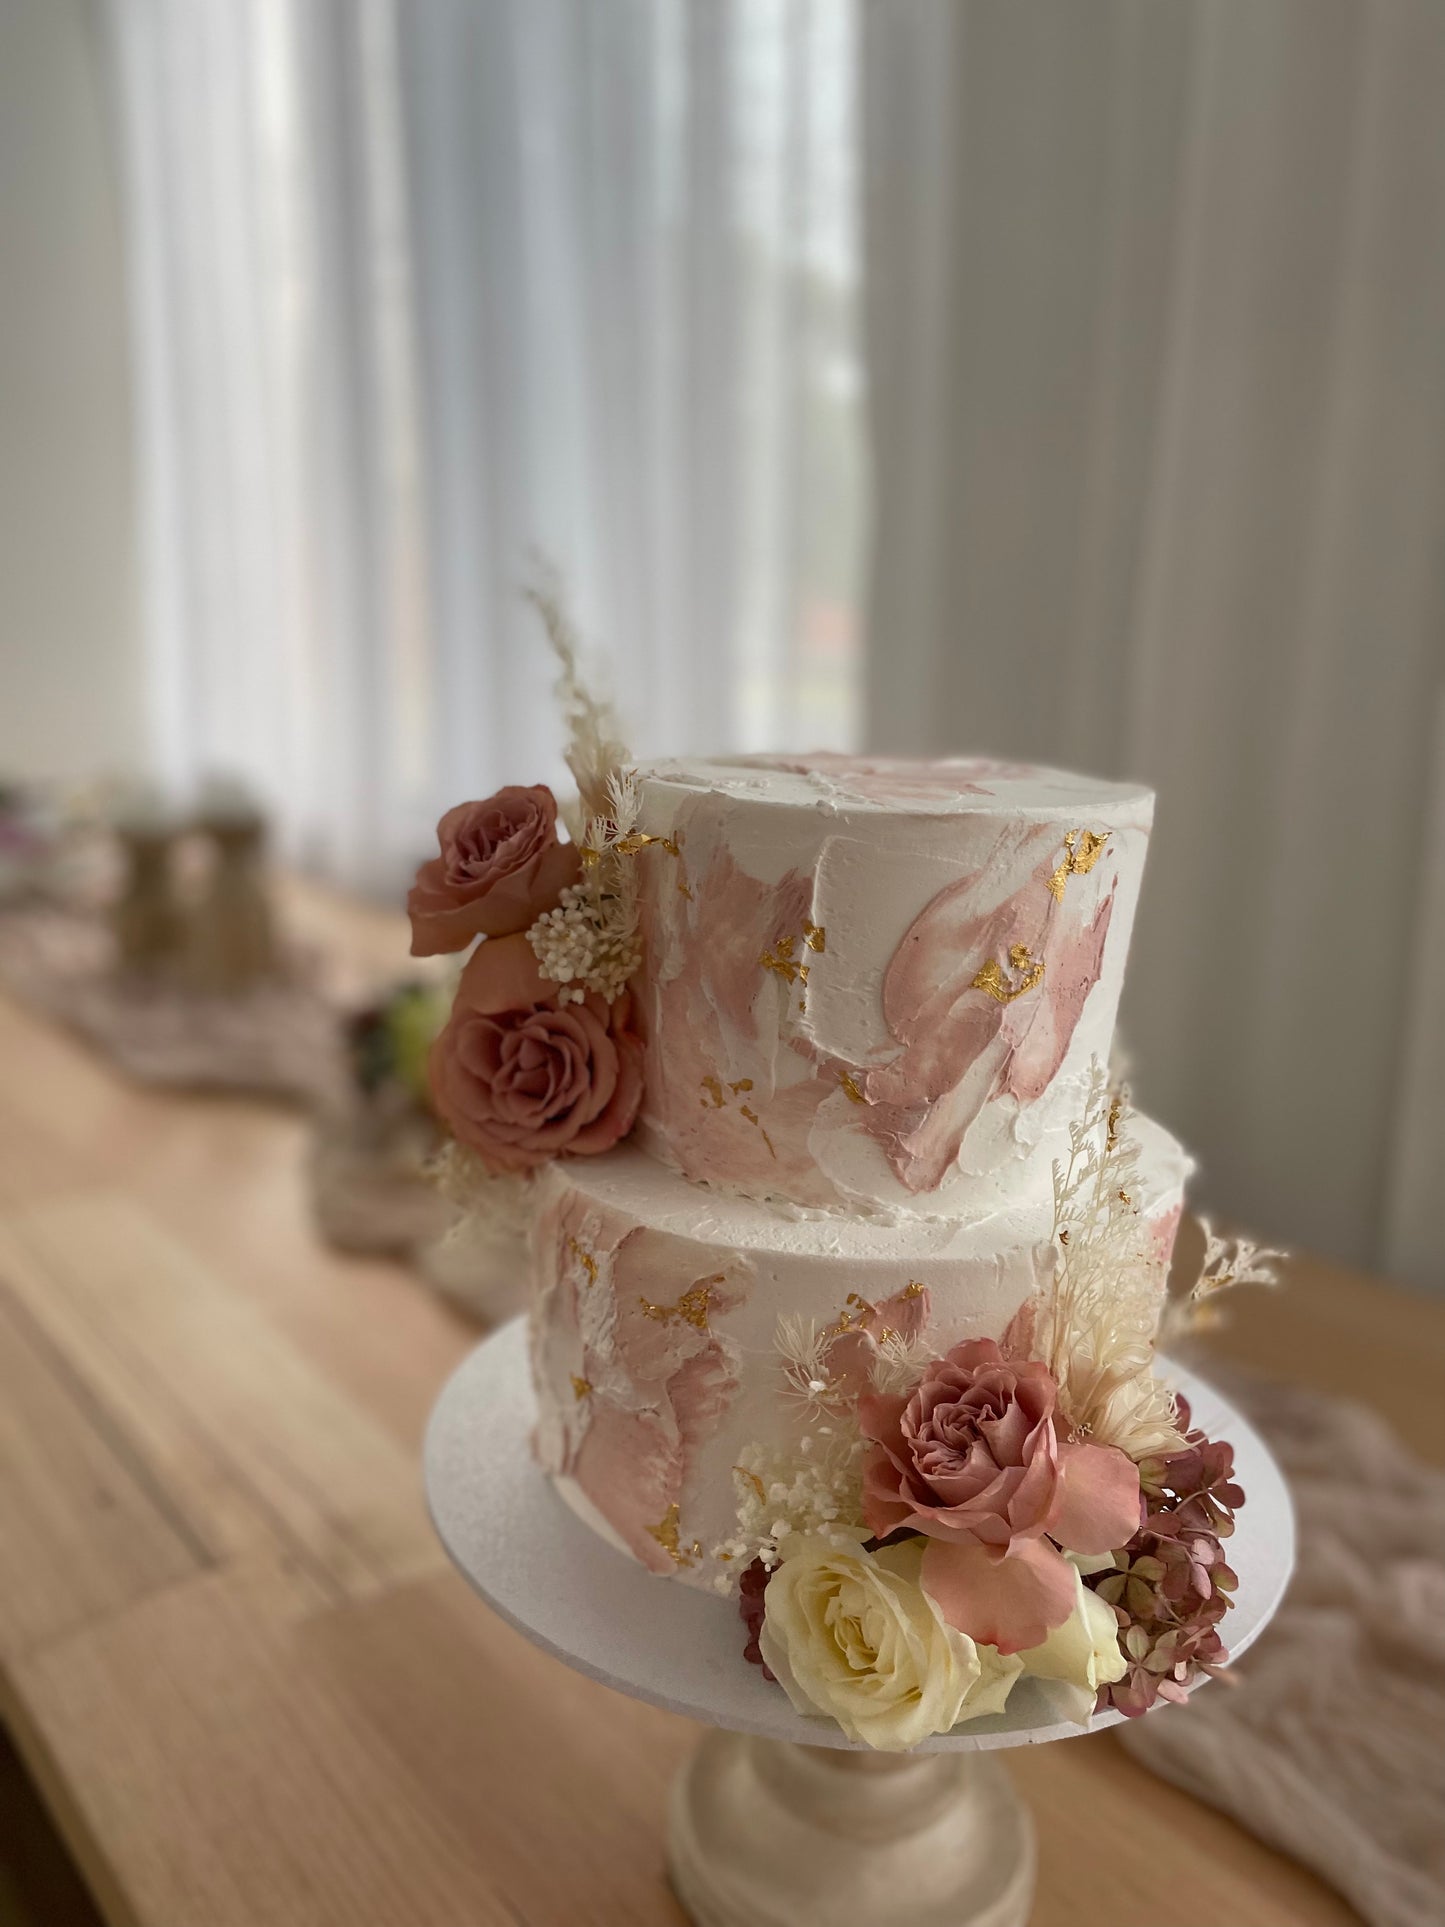 2 Tier Marble Rough Tones of Dusty Pink Buttercream